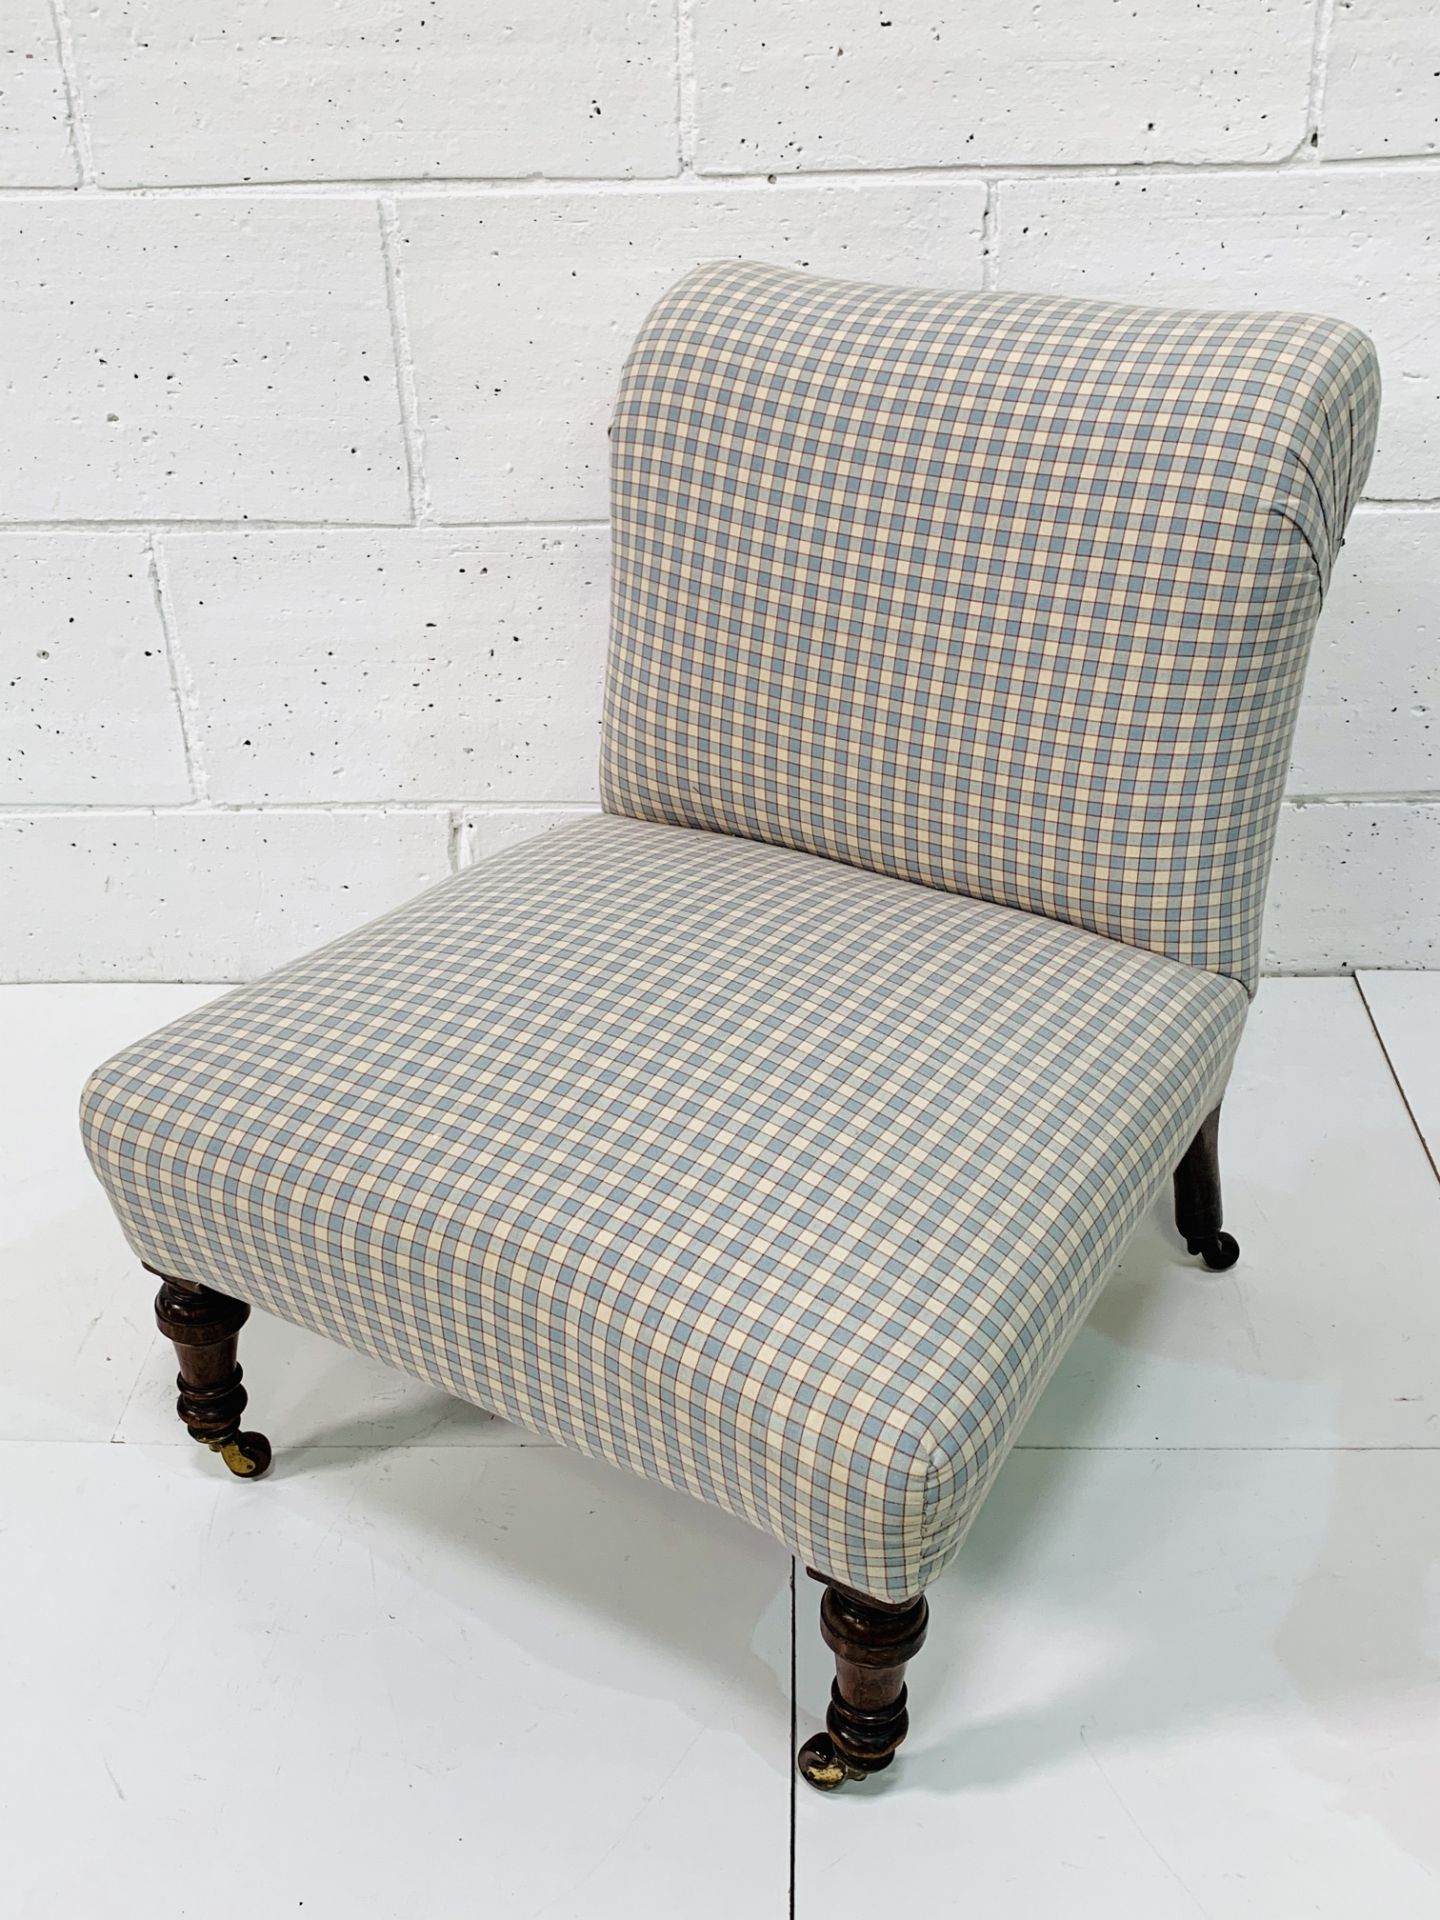 Victorian check fabric upholstered nursing chair on ceramic casters.